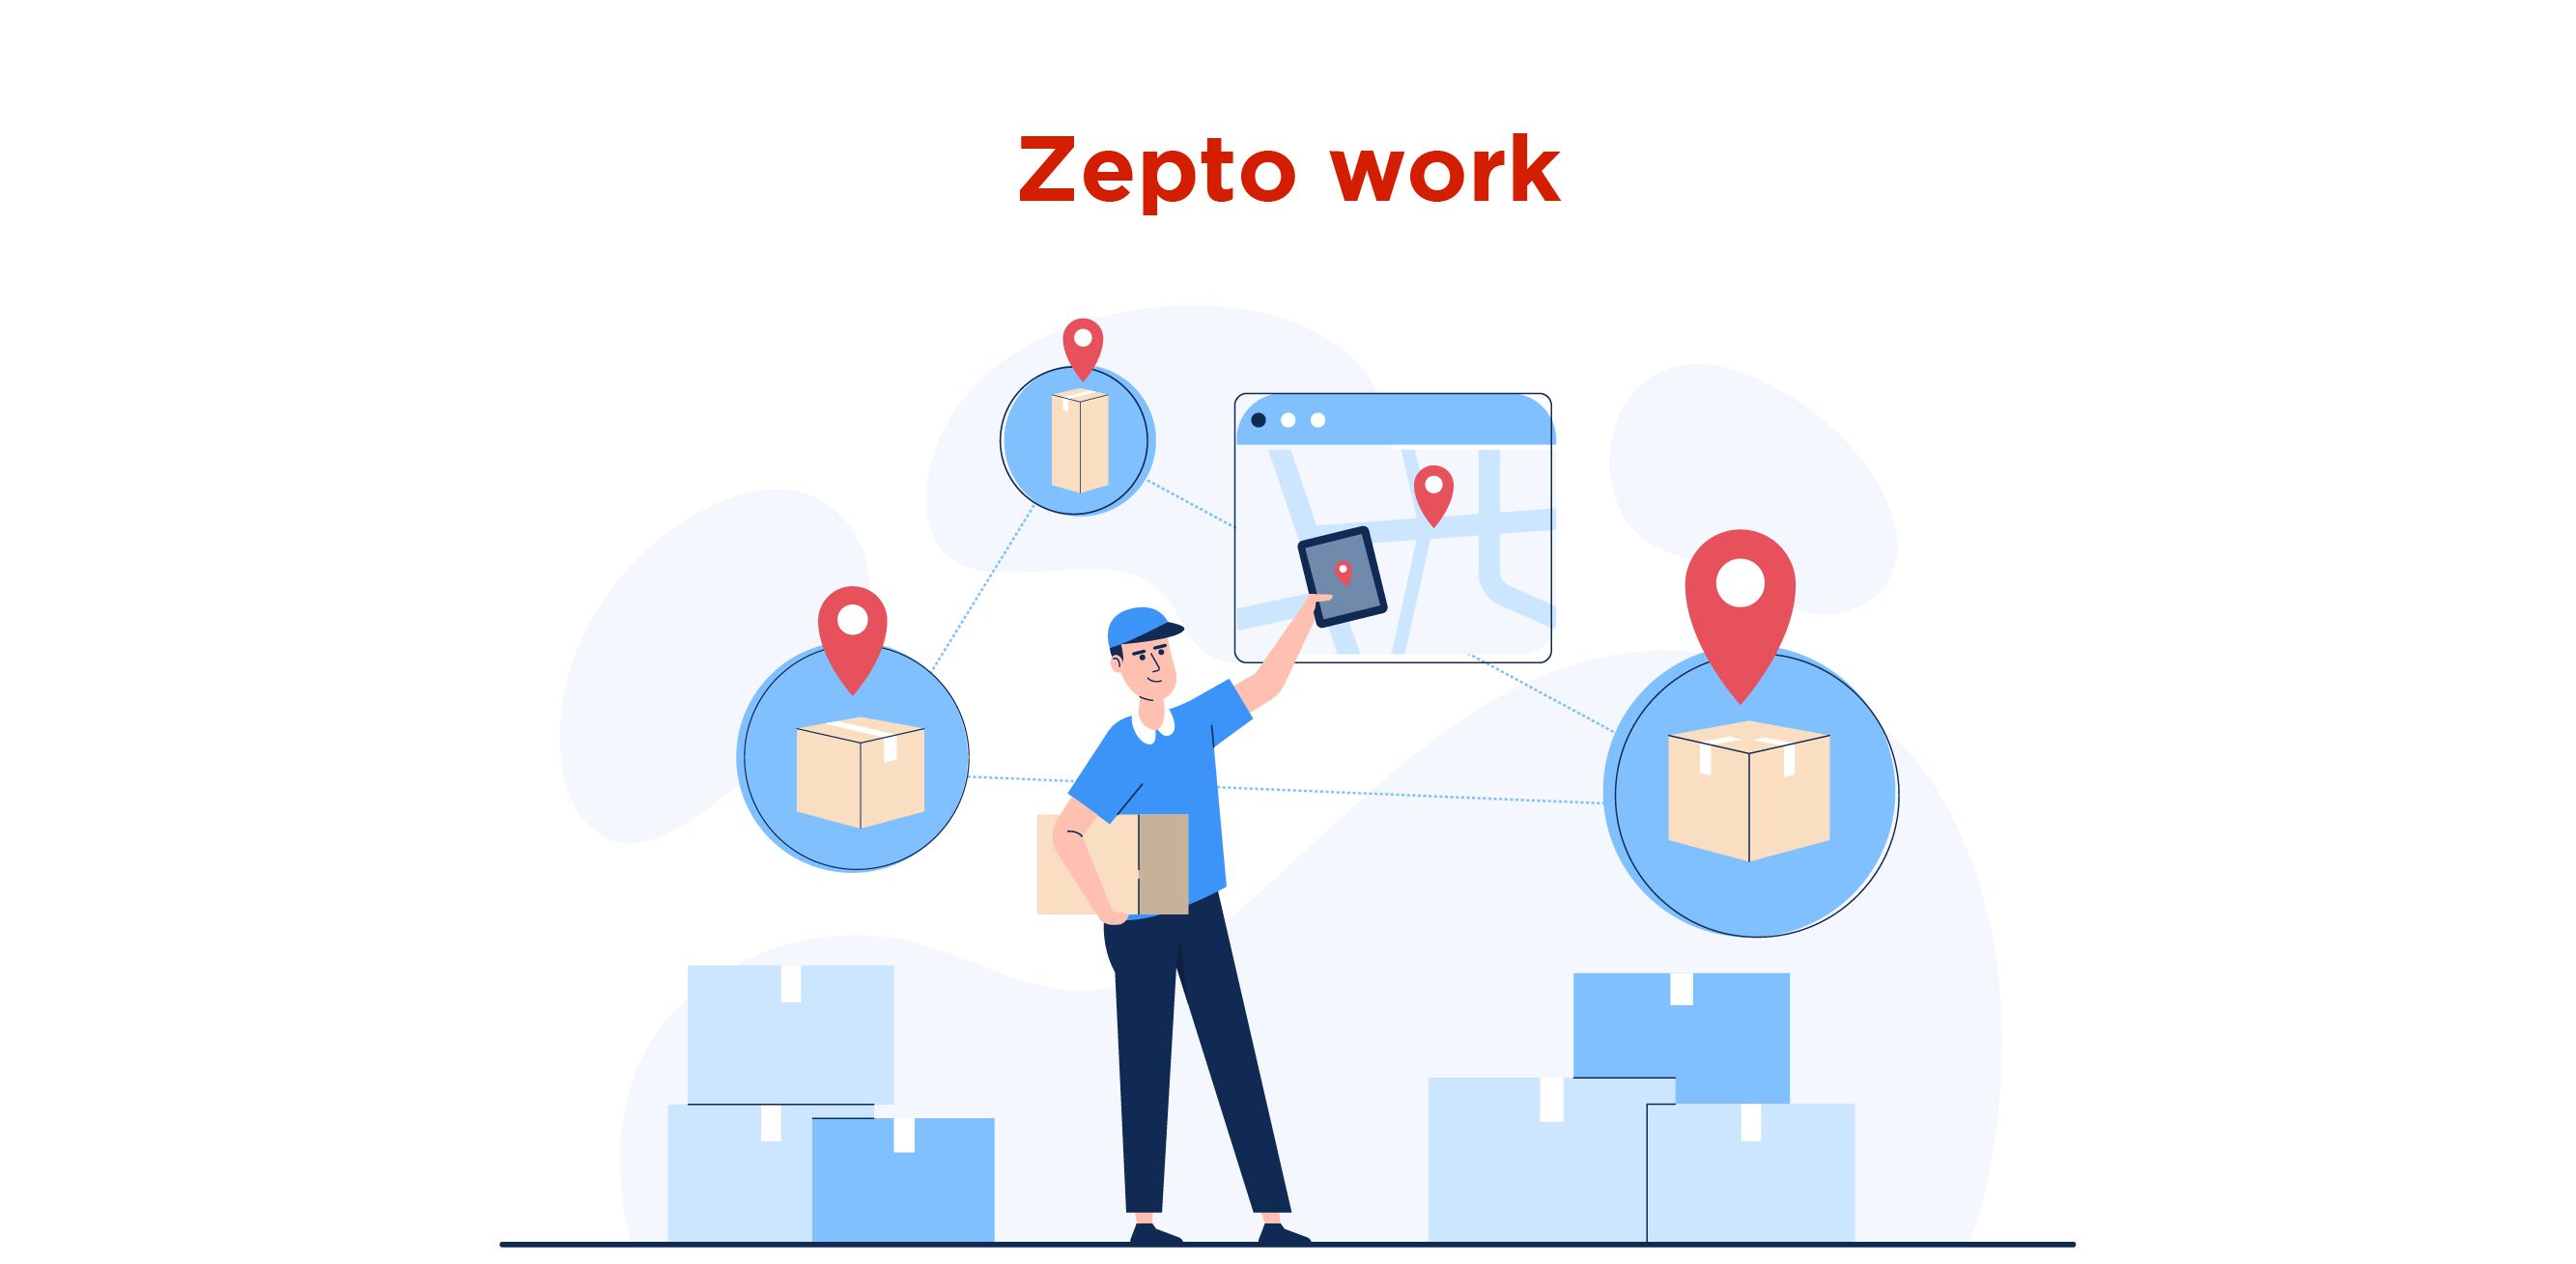 How does Zepto work? 